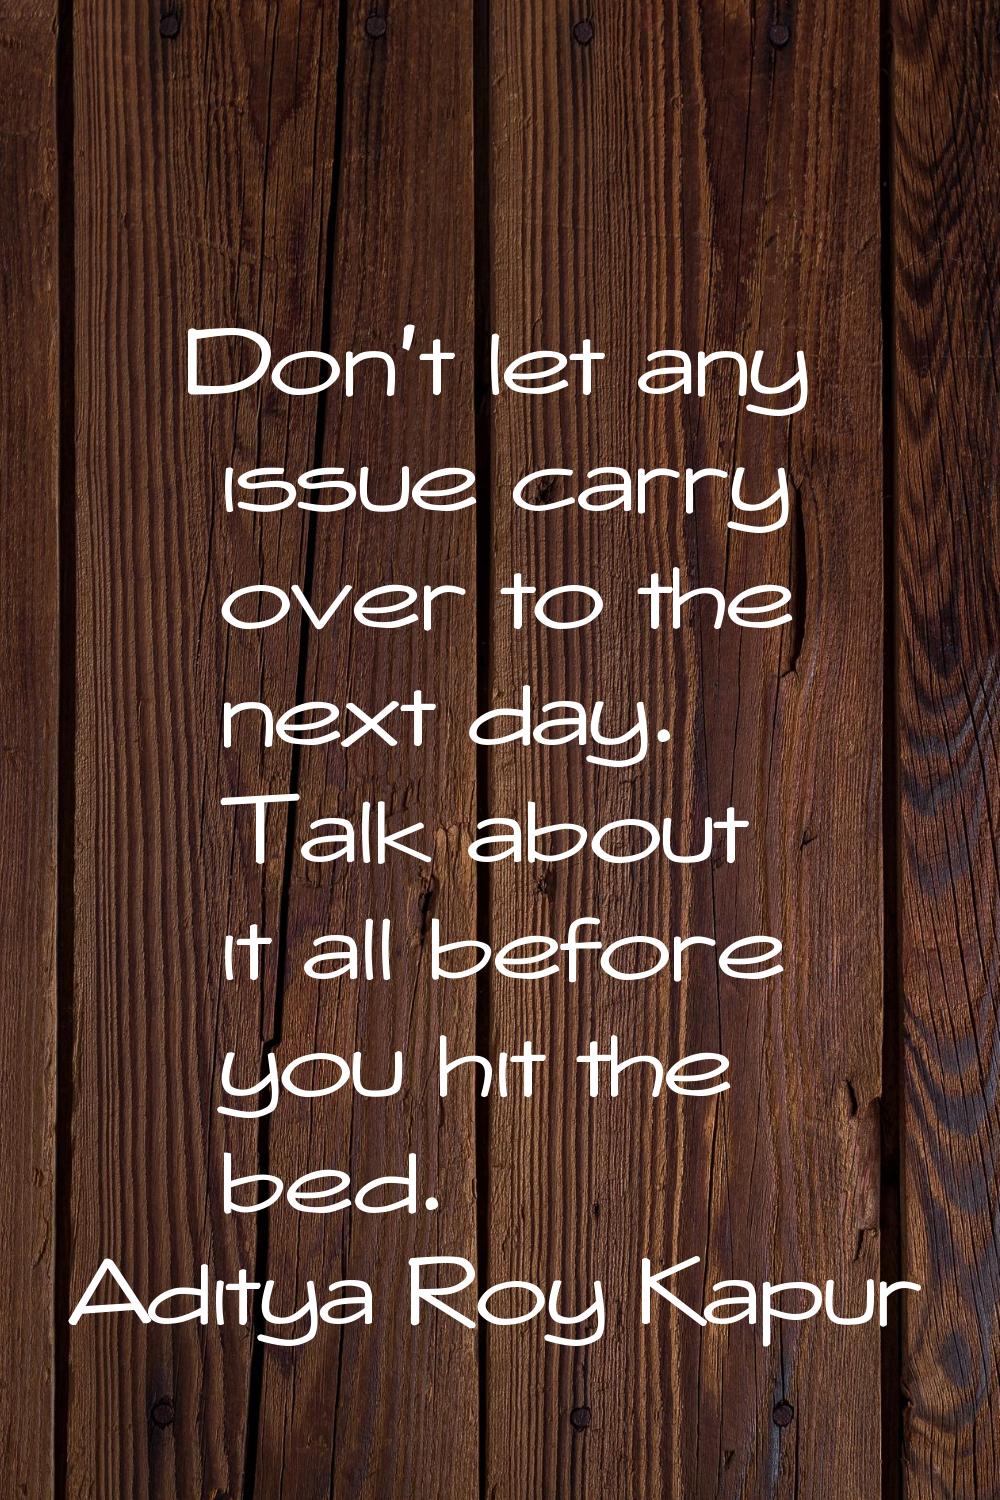 Don't let any issue carry over to the next day. Talk about it all before you hit the bed.